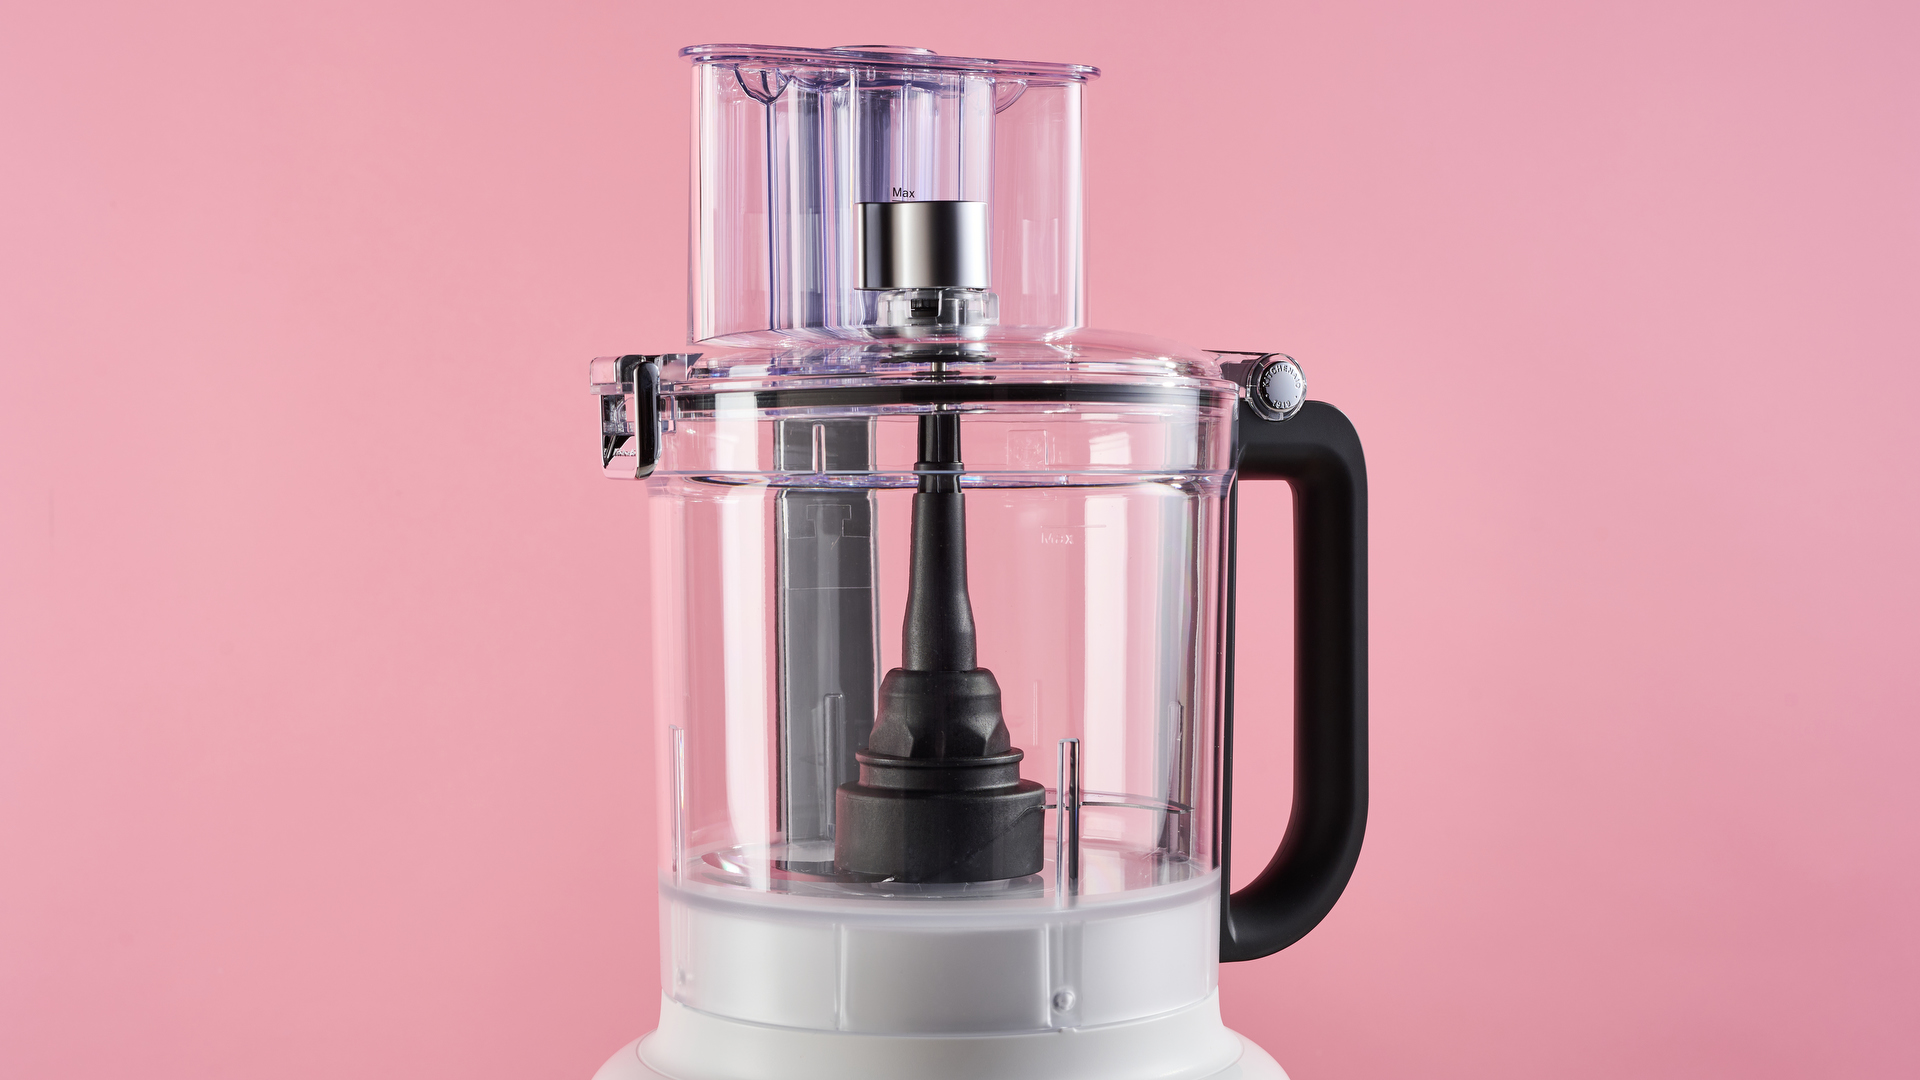 A close up of the 13 cup work bowl of the KitchenAid 13 cup food processor, the black handle is on the right hand side. It is photographed against a pink background.